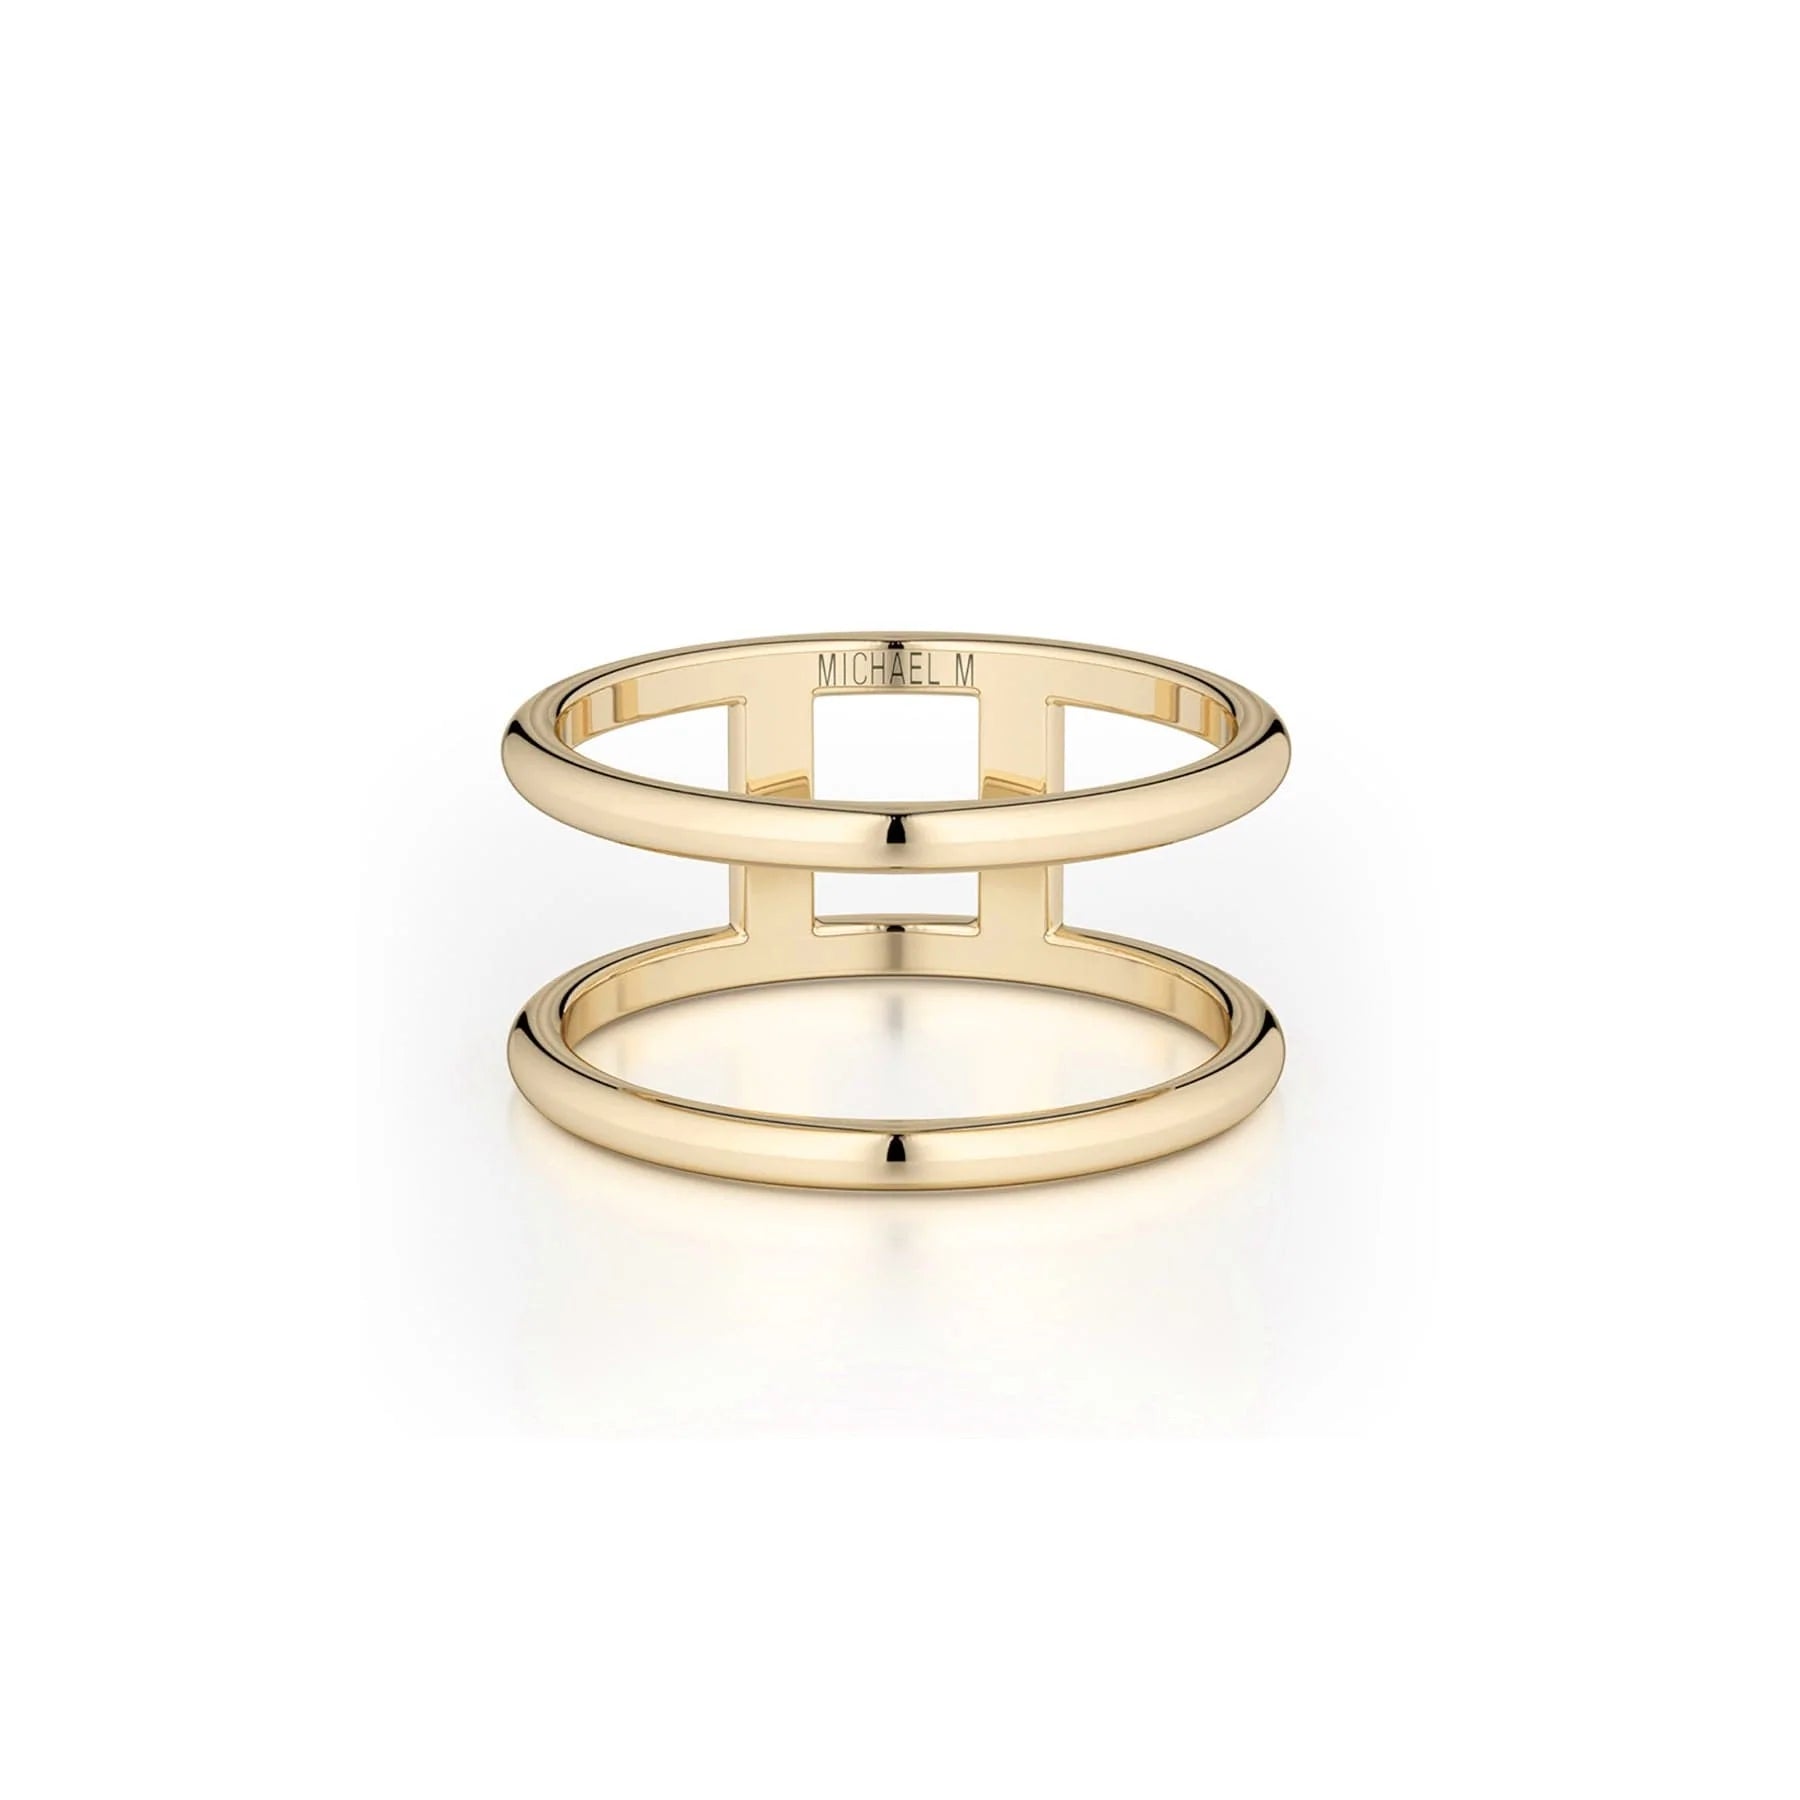 MICHAEL M Fashion Rings Solid Double Band Ring